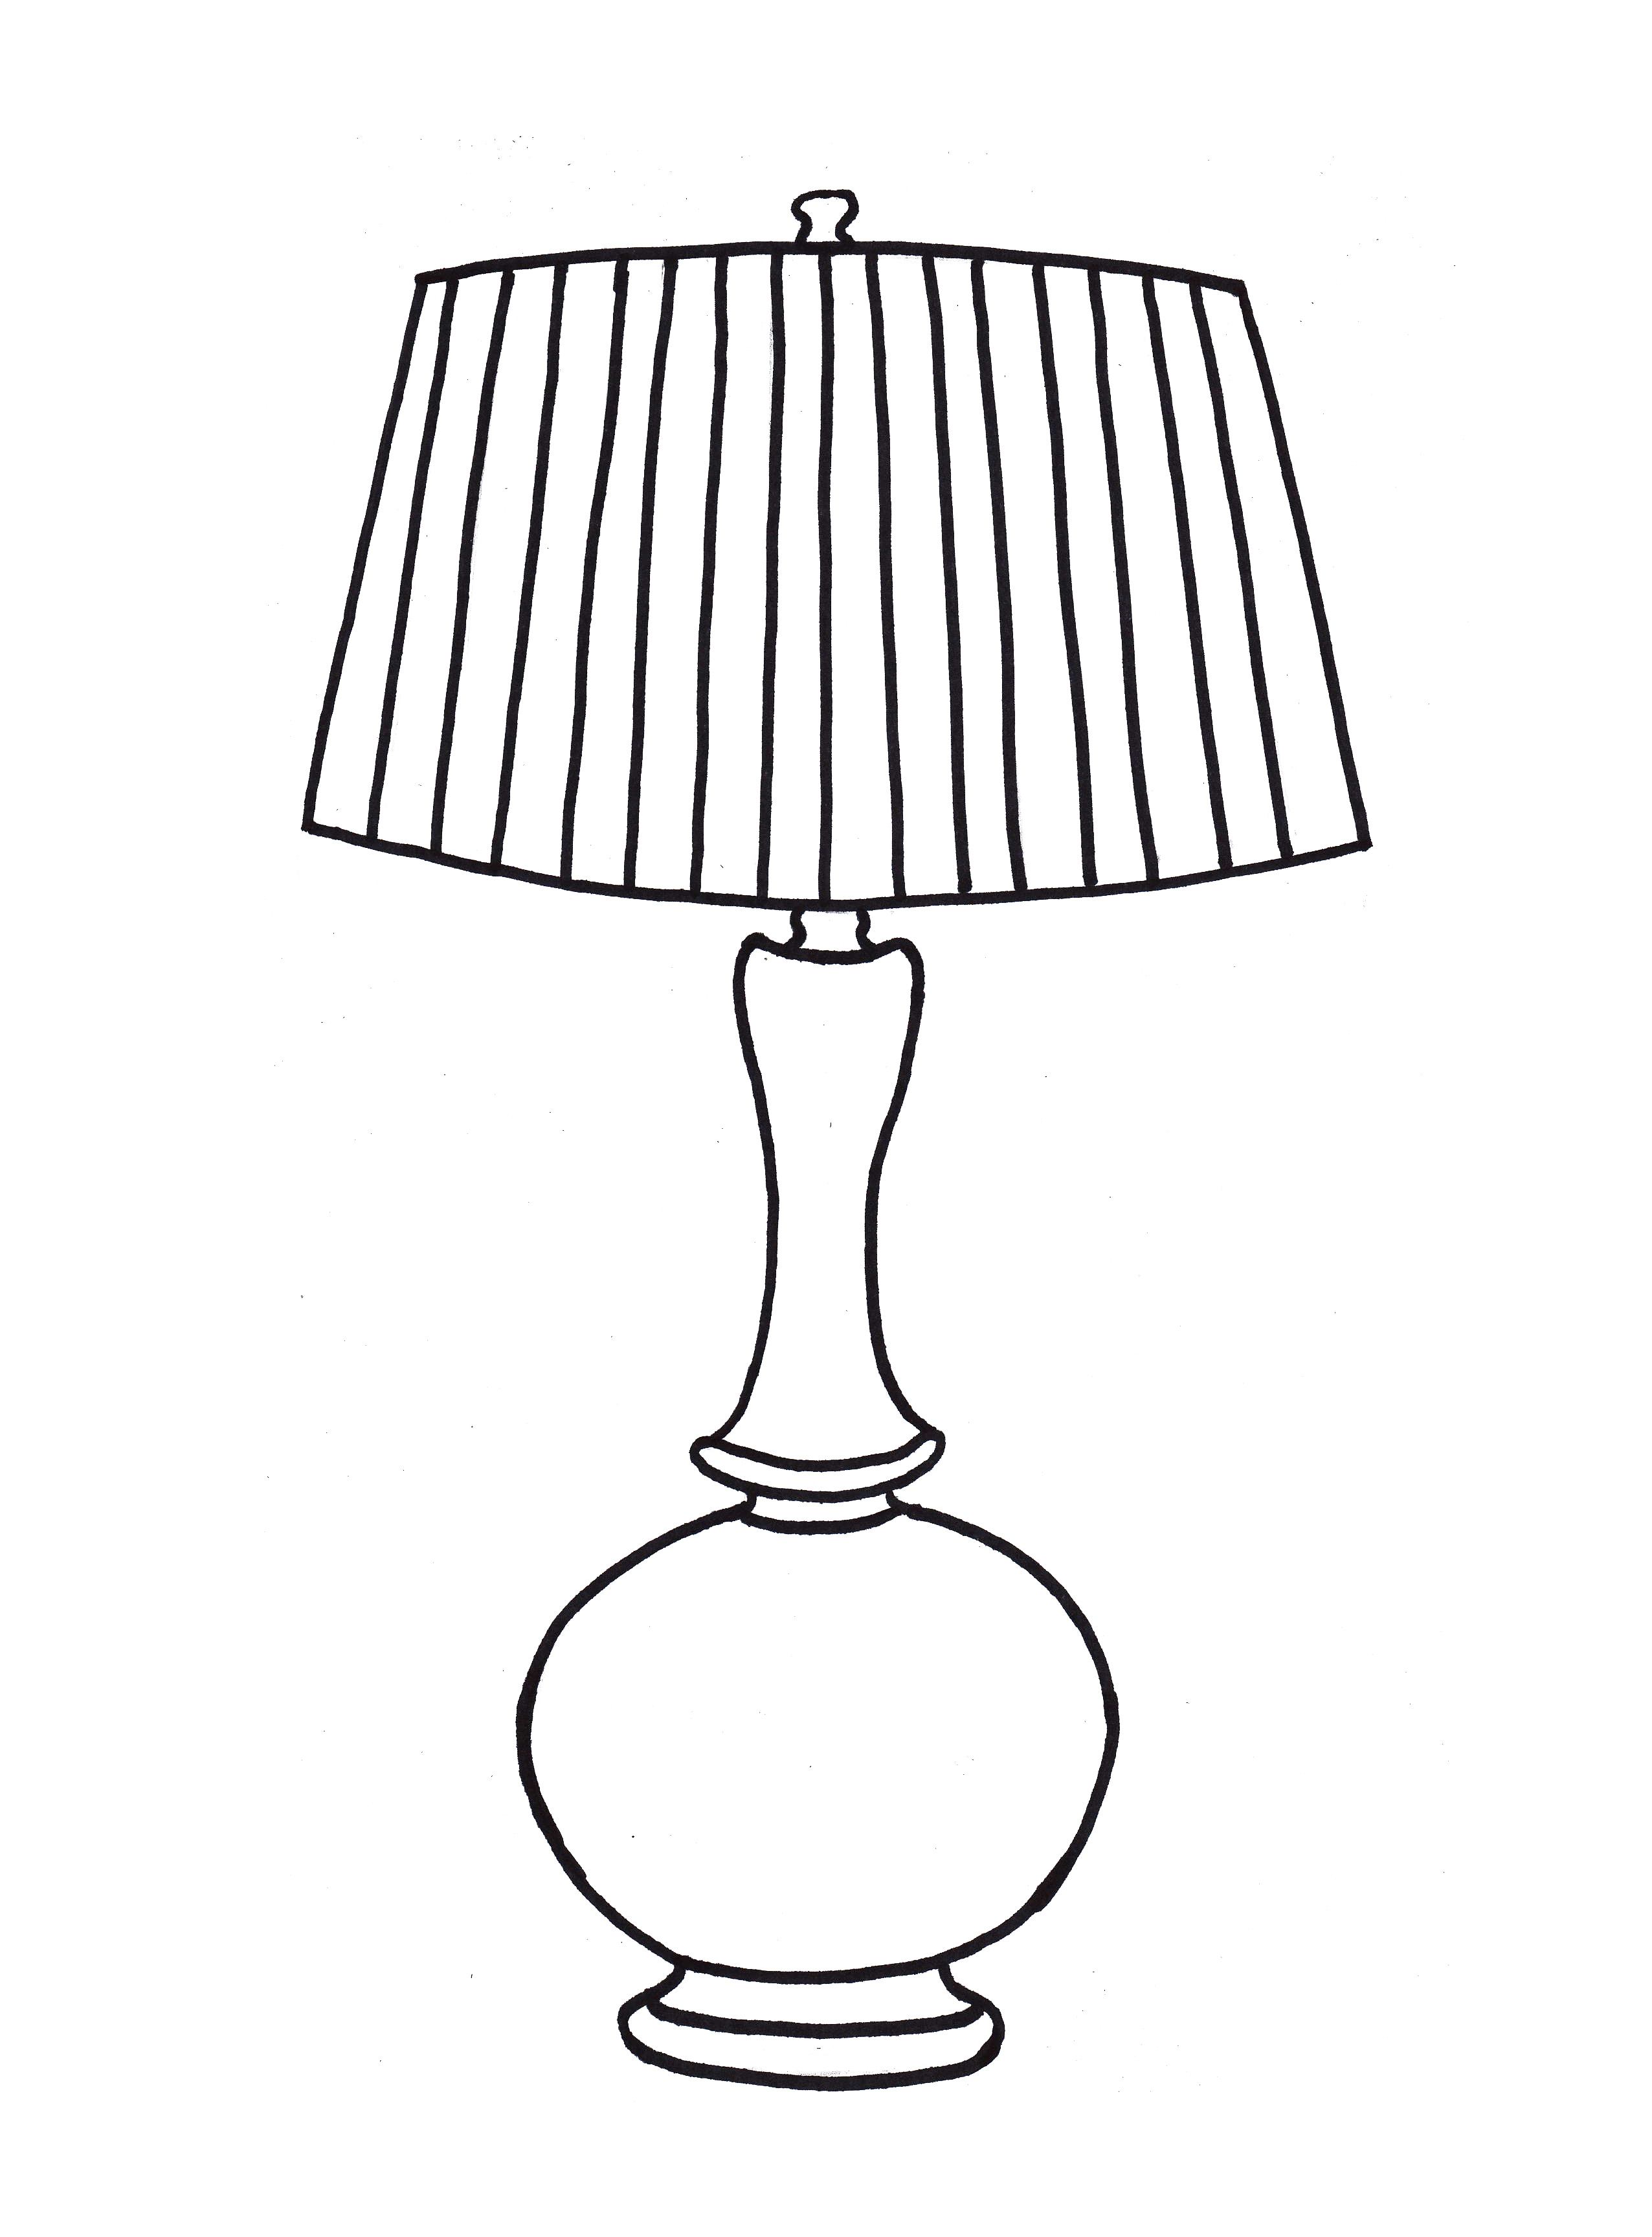 Interior design drawing of a table lamp